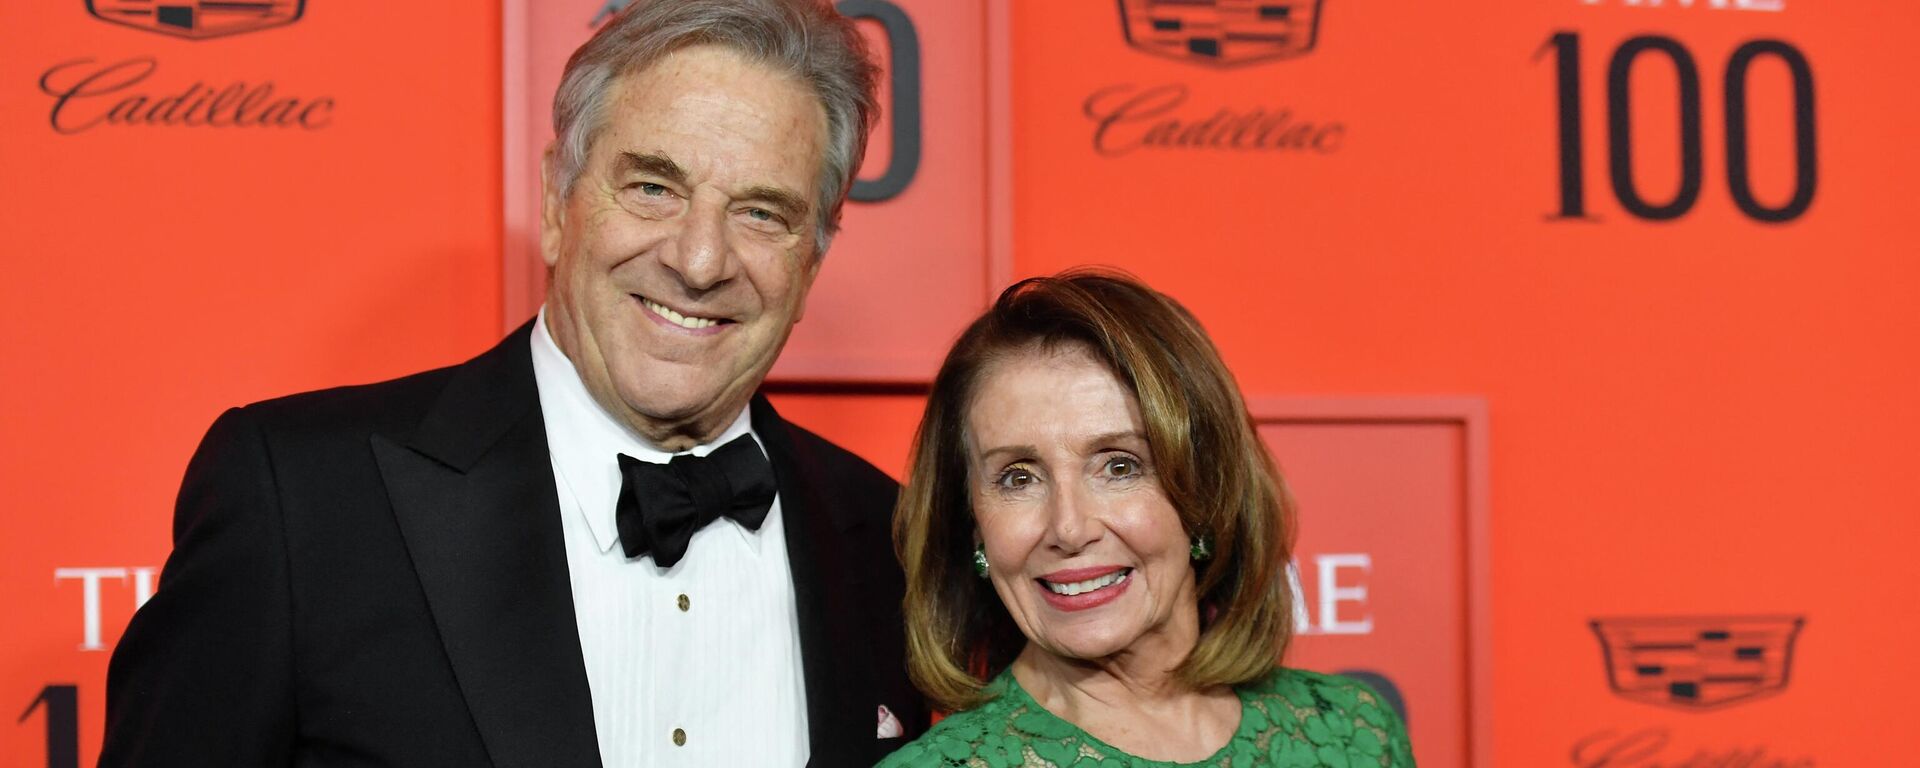 In this file photo taken on April 23, 2019,  US Speaker of the House of Representatives Nancy Pelosi (R) and husband Paul Pelosi arrive for the Time 100 Gala at Lincoln Center in New York. - Sputnik International, 1920, 03.11.2022